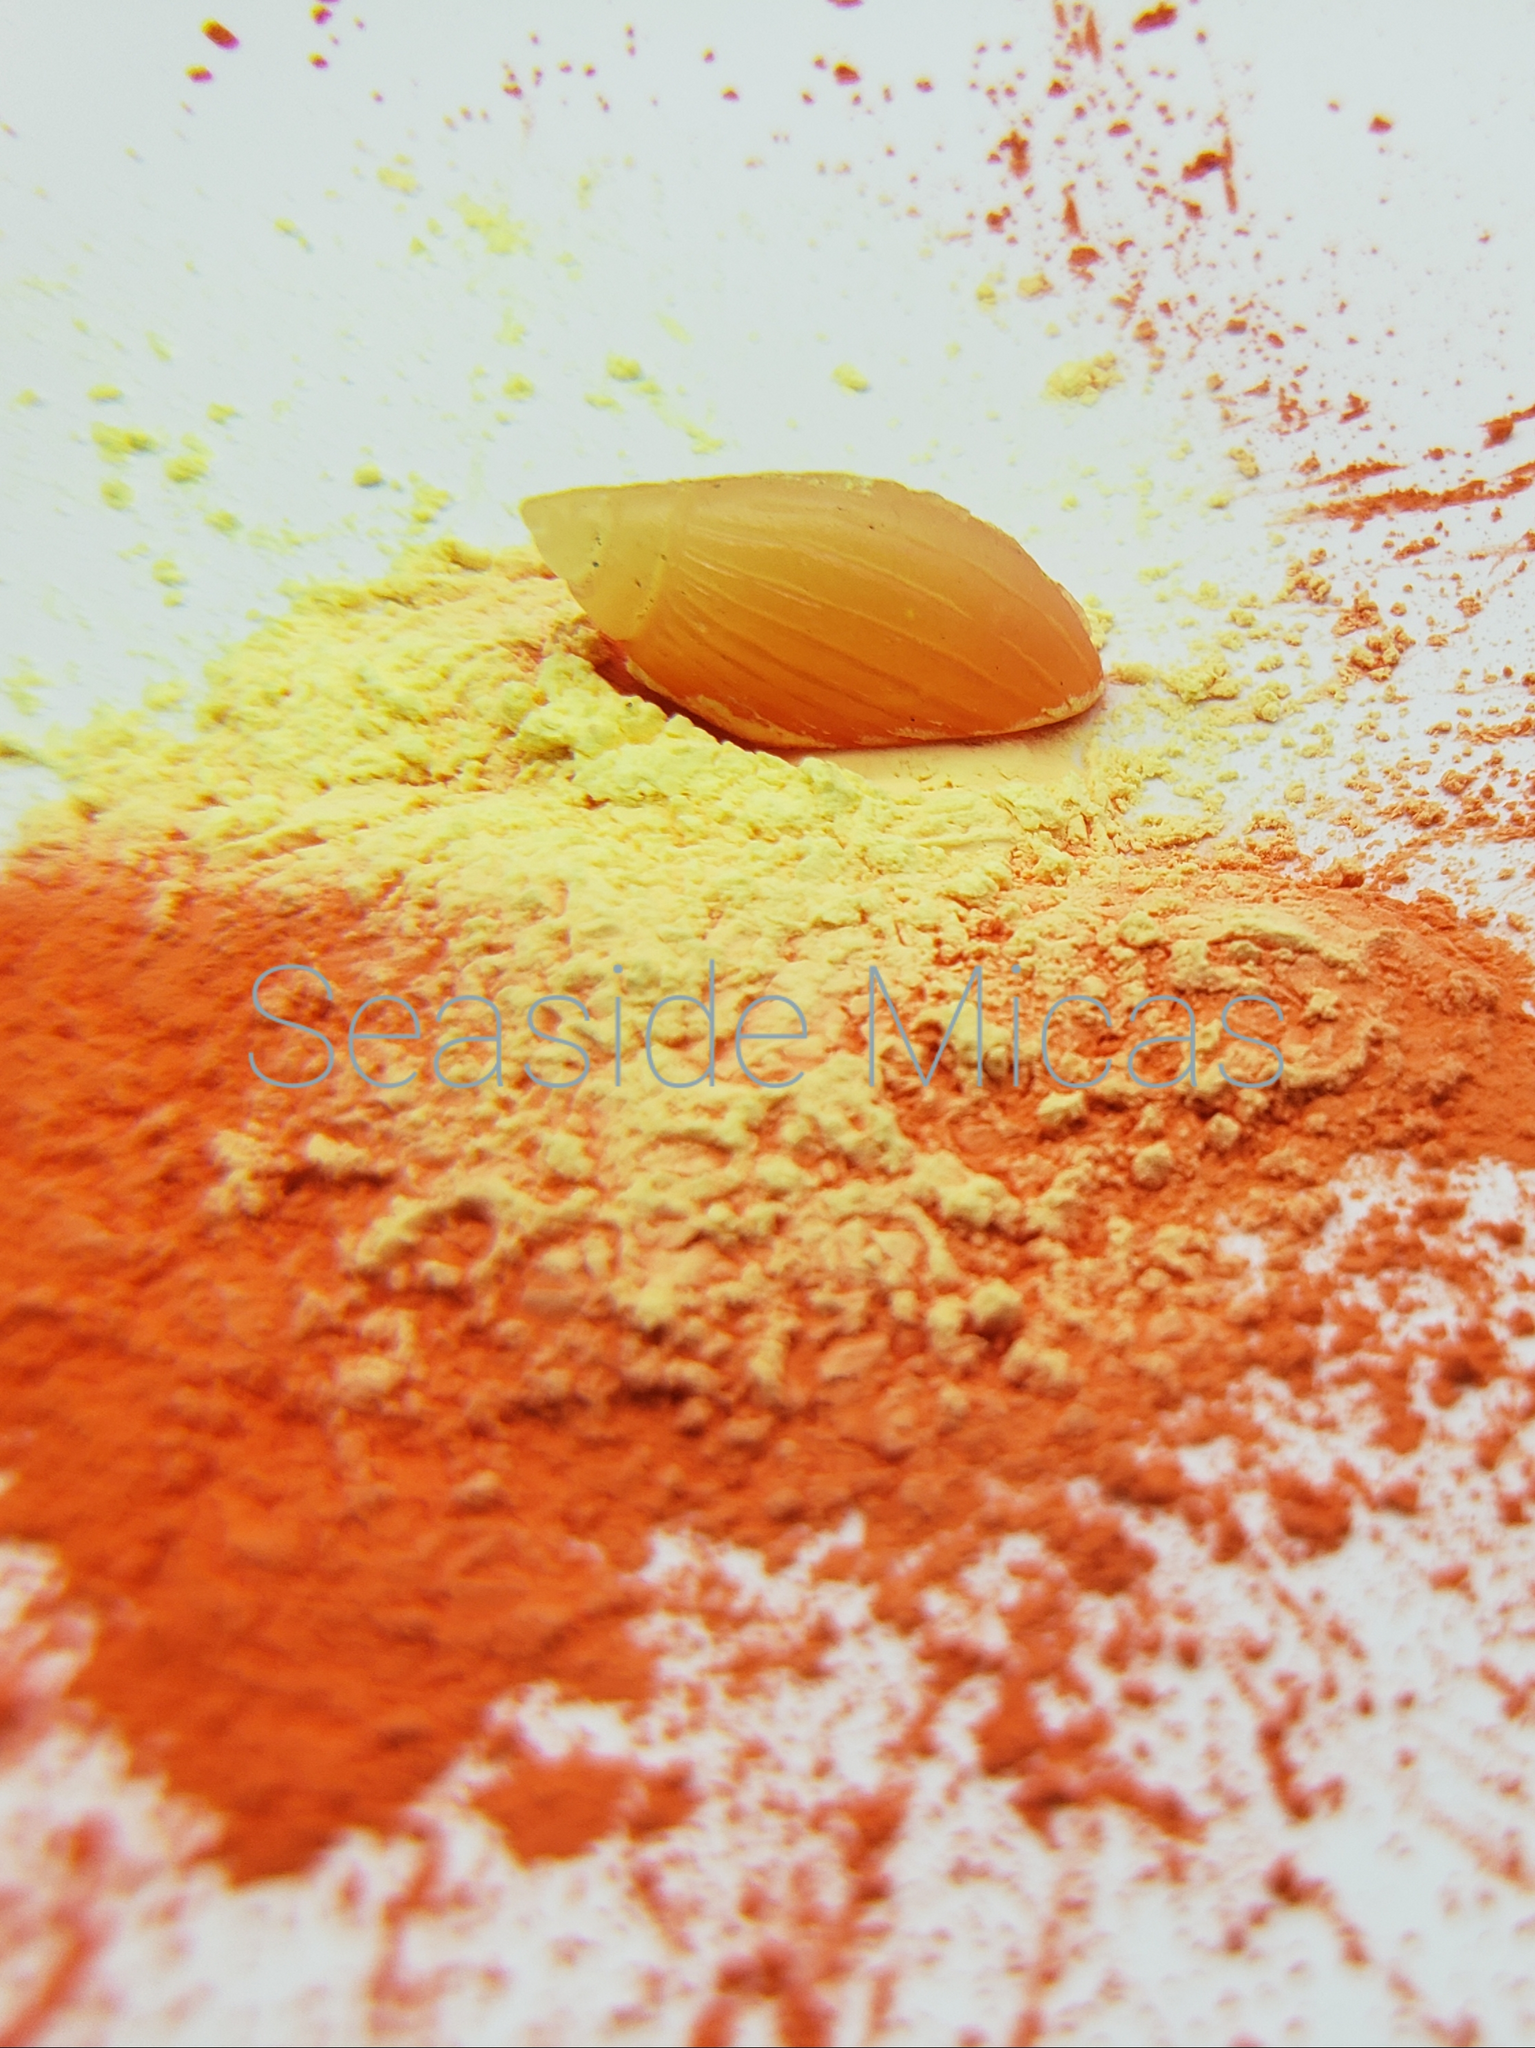 THERMOCHROMIC TEMPERATURE COLOUR CHANGING PIGMENT POWDER - ORANGE TO CLEAR